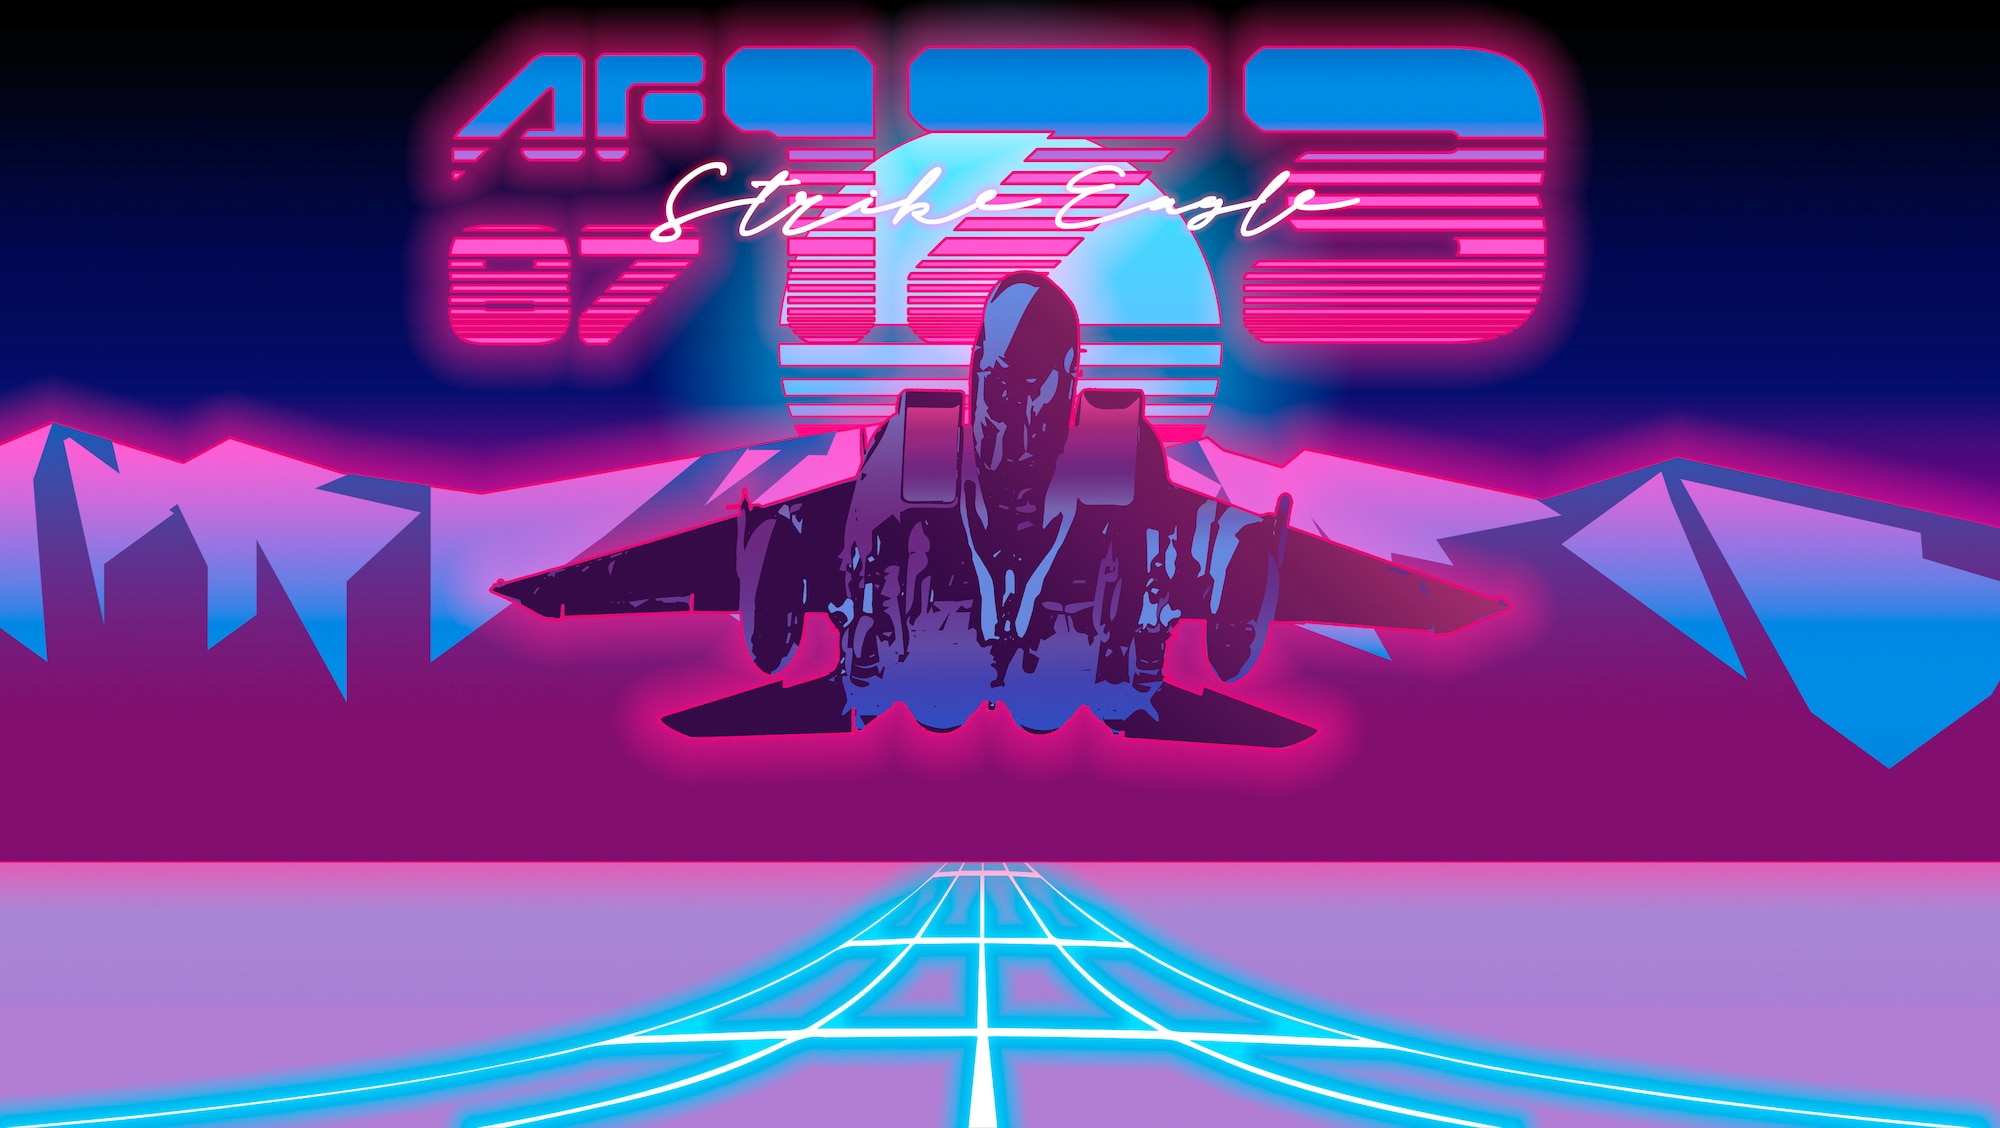 This U.S. Air Force graphic represents the F-15E Strike Eagle, tail number 87-173, assigned to the 389th Fighter Squadron at Mountain Home Air Force Base, Idaho. Jet 173 was the lead jet during the longest sortie performed by a fighter jet in mission called the “Kabul-ki Dance” Nov. 12, 2001, during Operation Enduring Freedom. This mission lasted over 15 hours and required 10 in-air refuelings while evading enemy attacks to, ultimately, take out several critical targets. (U.S. Air Force photo by Senior Airman Janae Capuno)